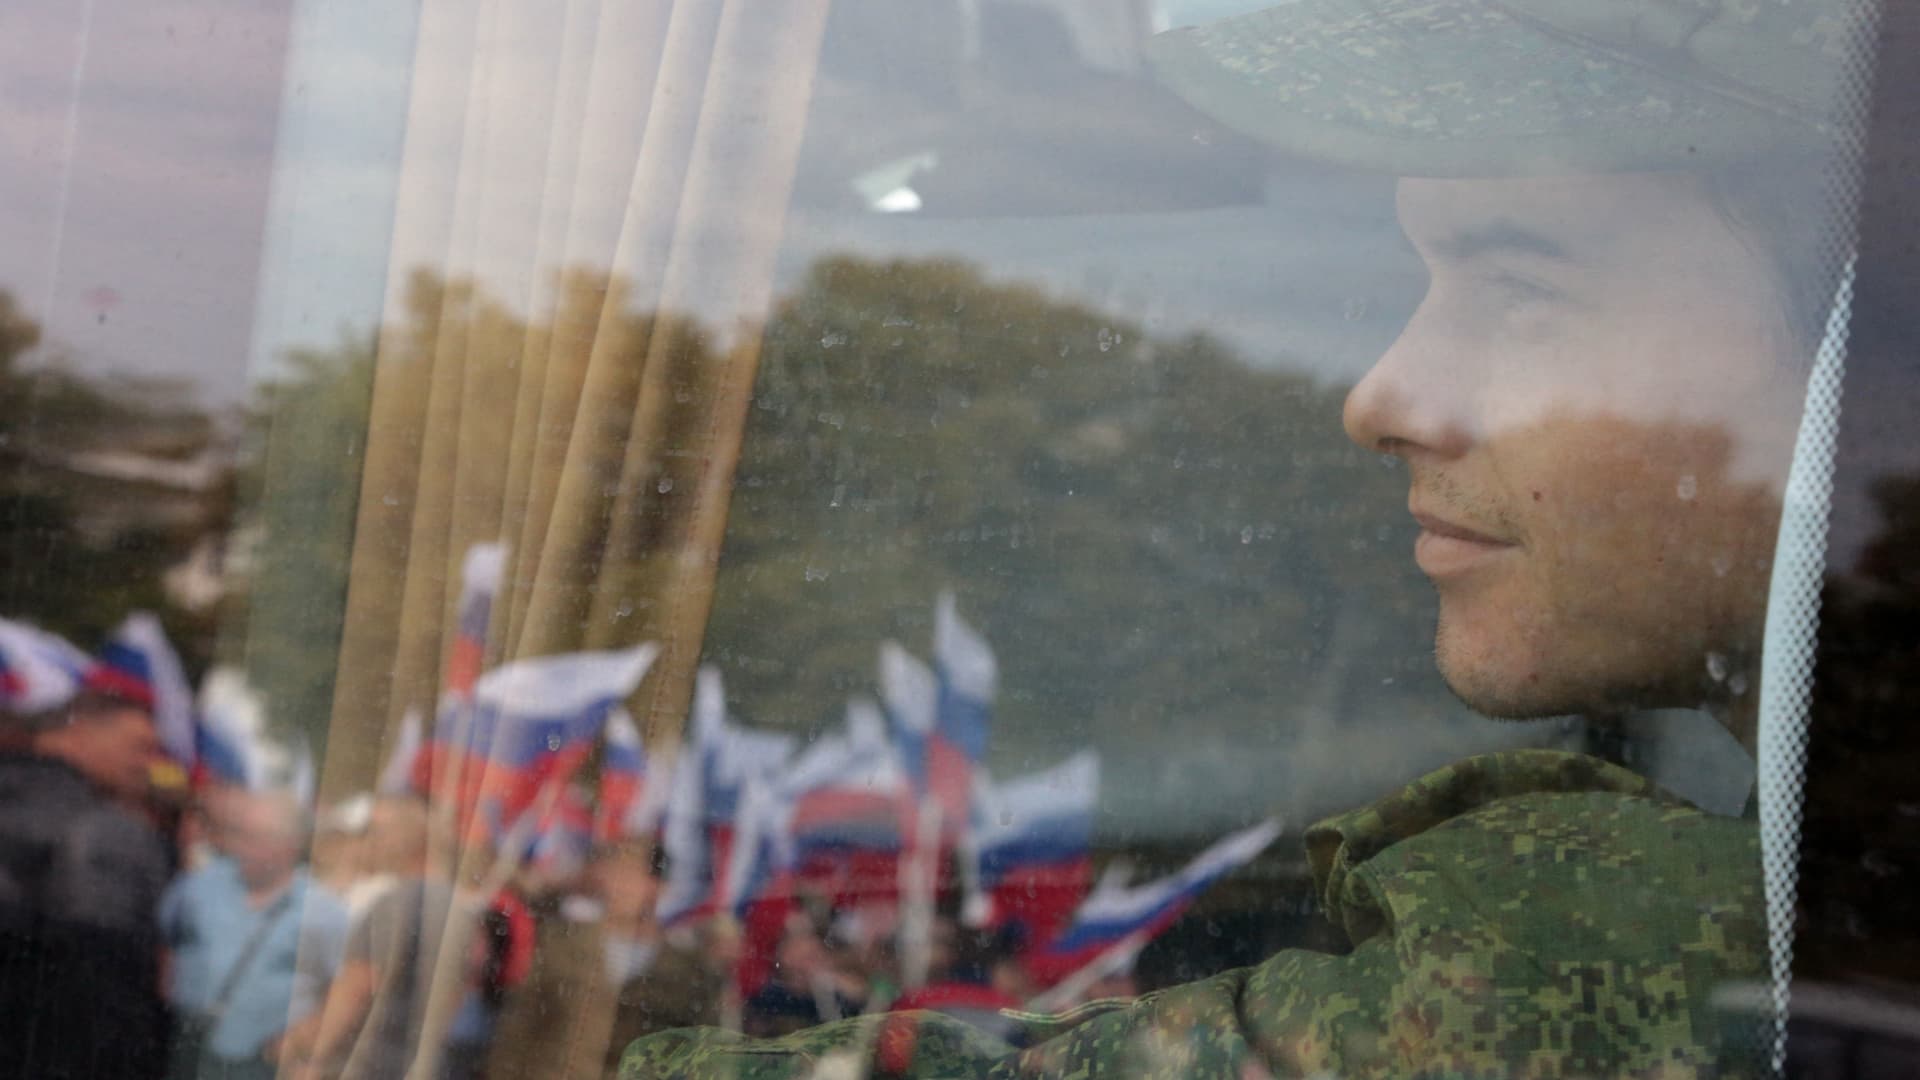 Reservists drafted during the partial mobilisation attend a departure ceremony in Sevastopol, Crimea, on September 27, 2022.